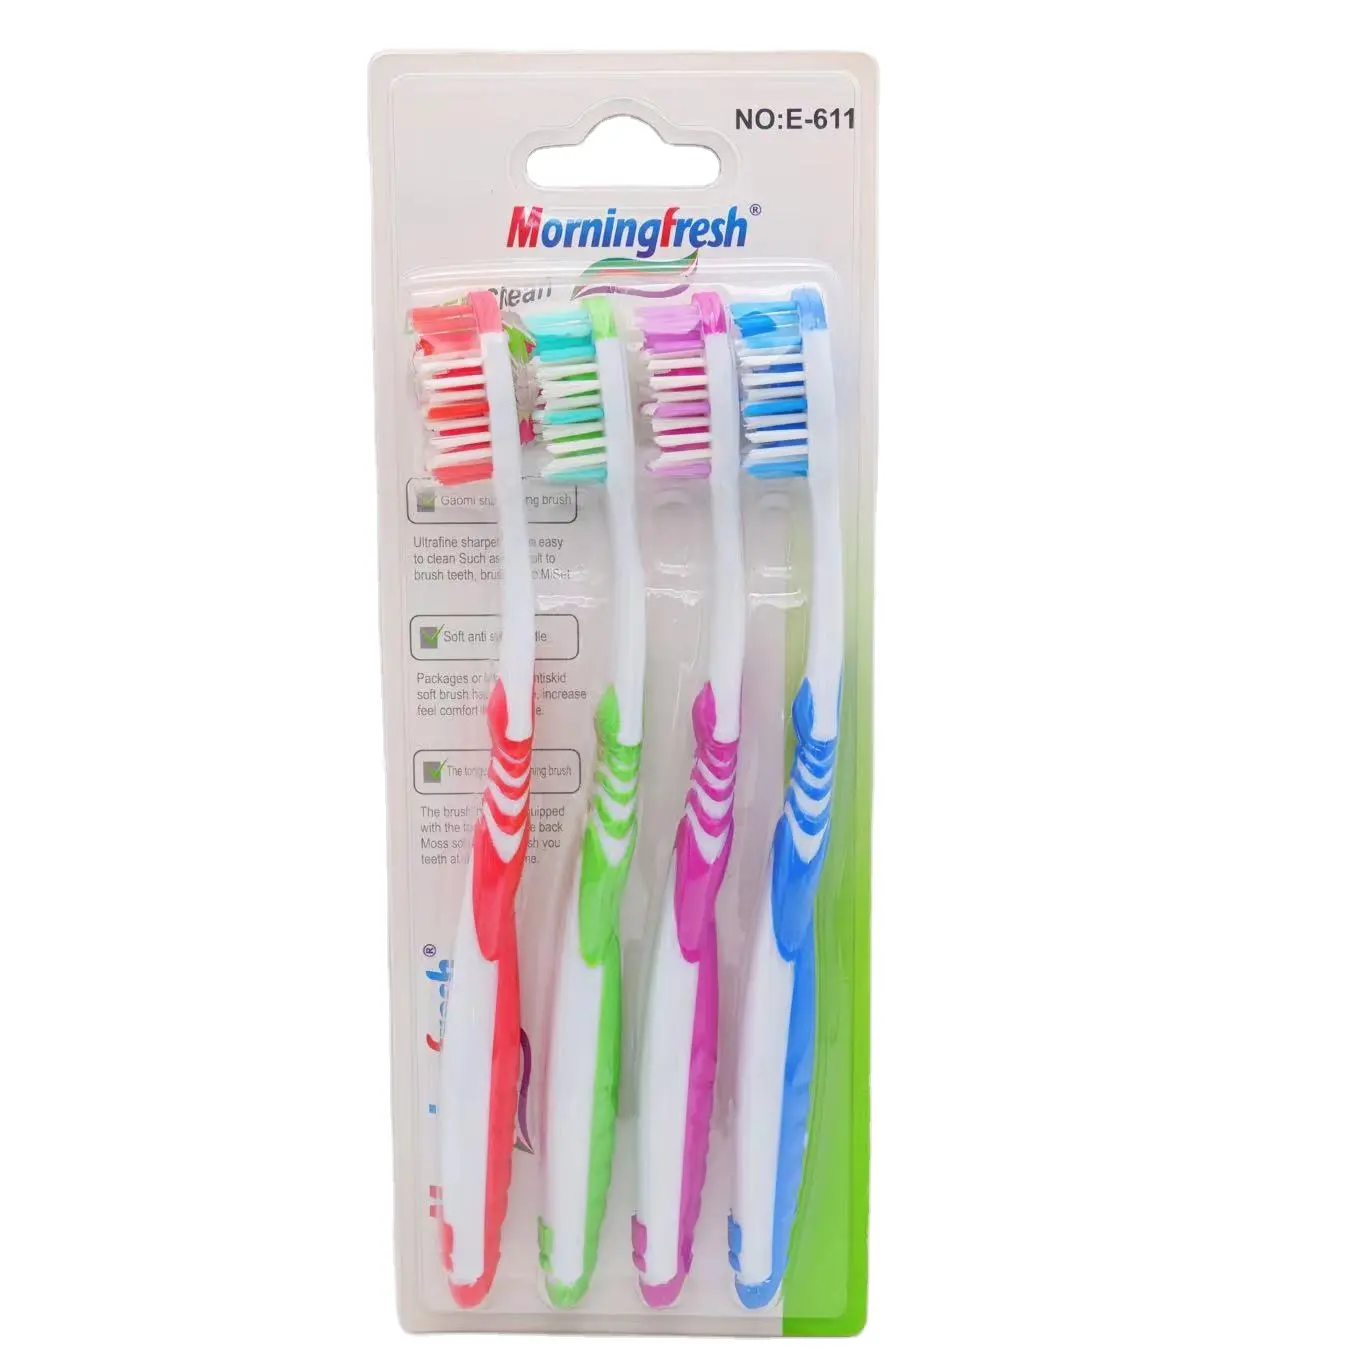 OEM/ODM 4 Pieces In 1 Pack High Quality Toothbrush Tongue Cleanercolorful Adult Toothbrush